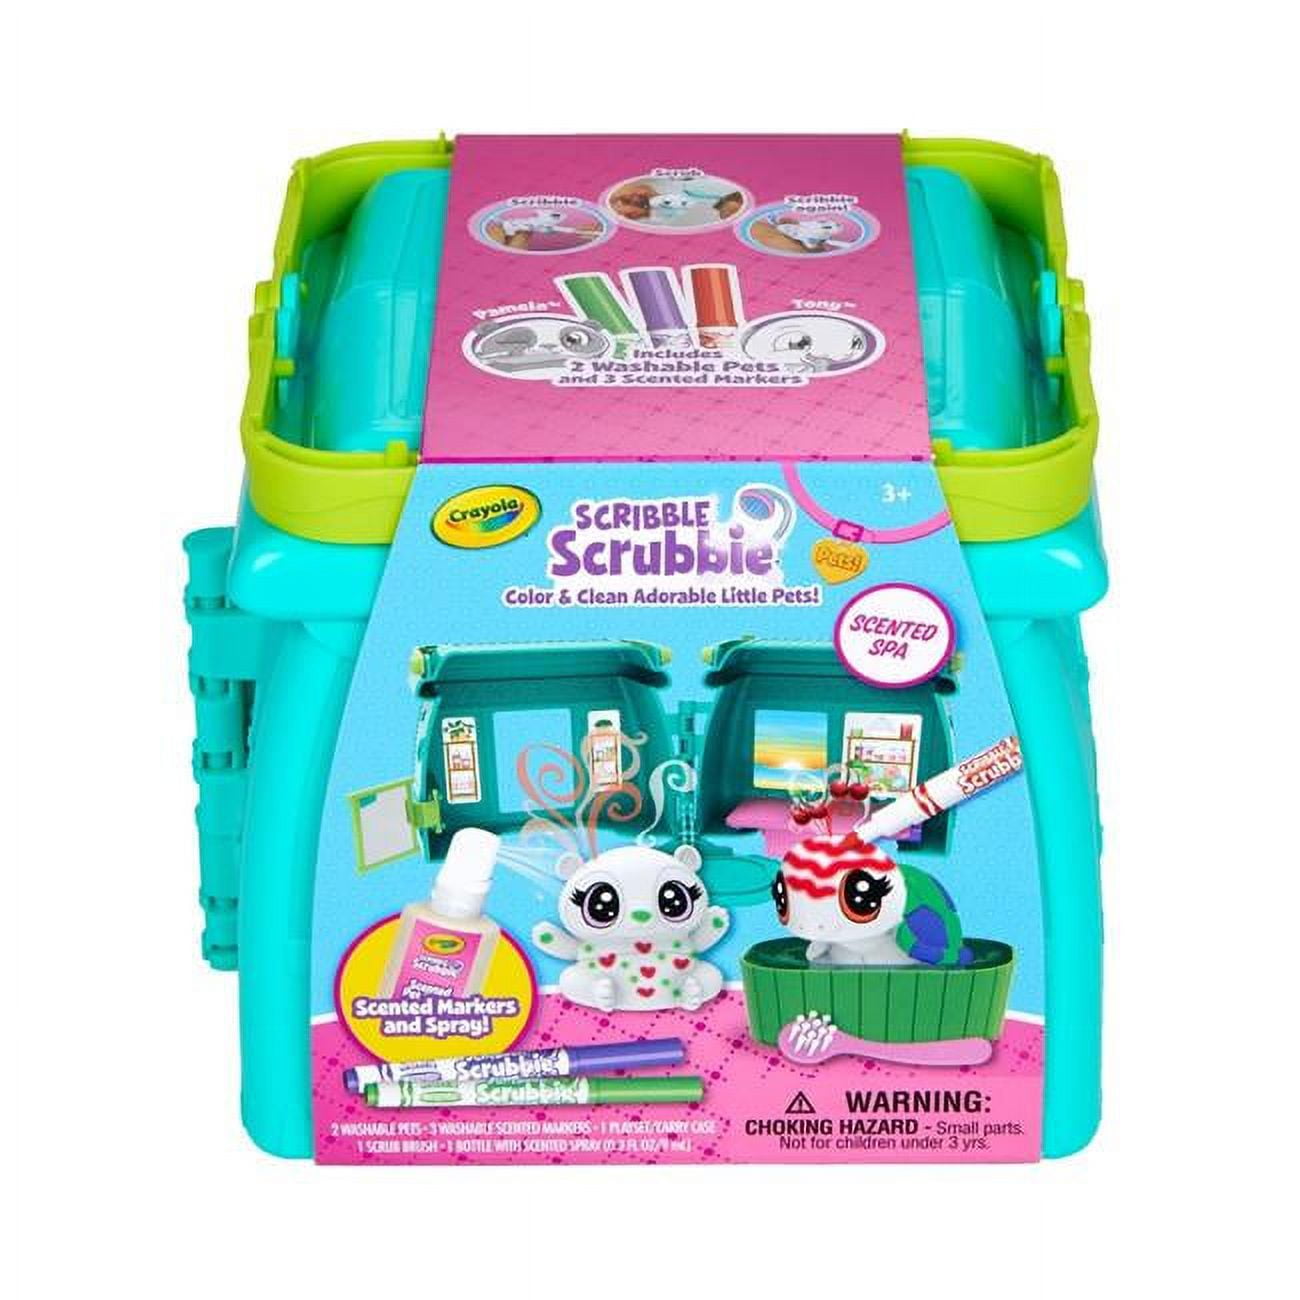 Crayola Scribble Scrubbie Tub Play Set - Shop Books & Coloring at